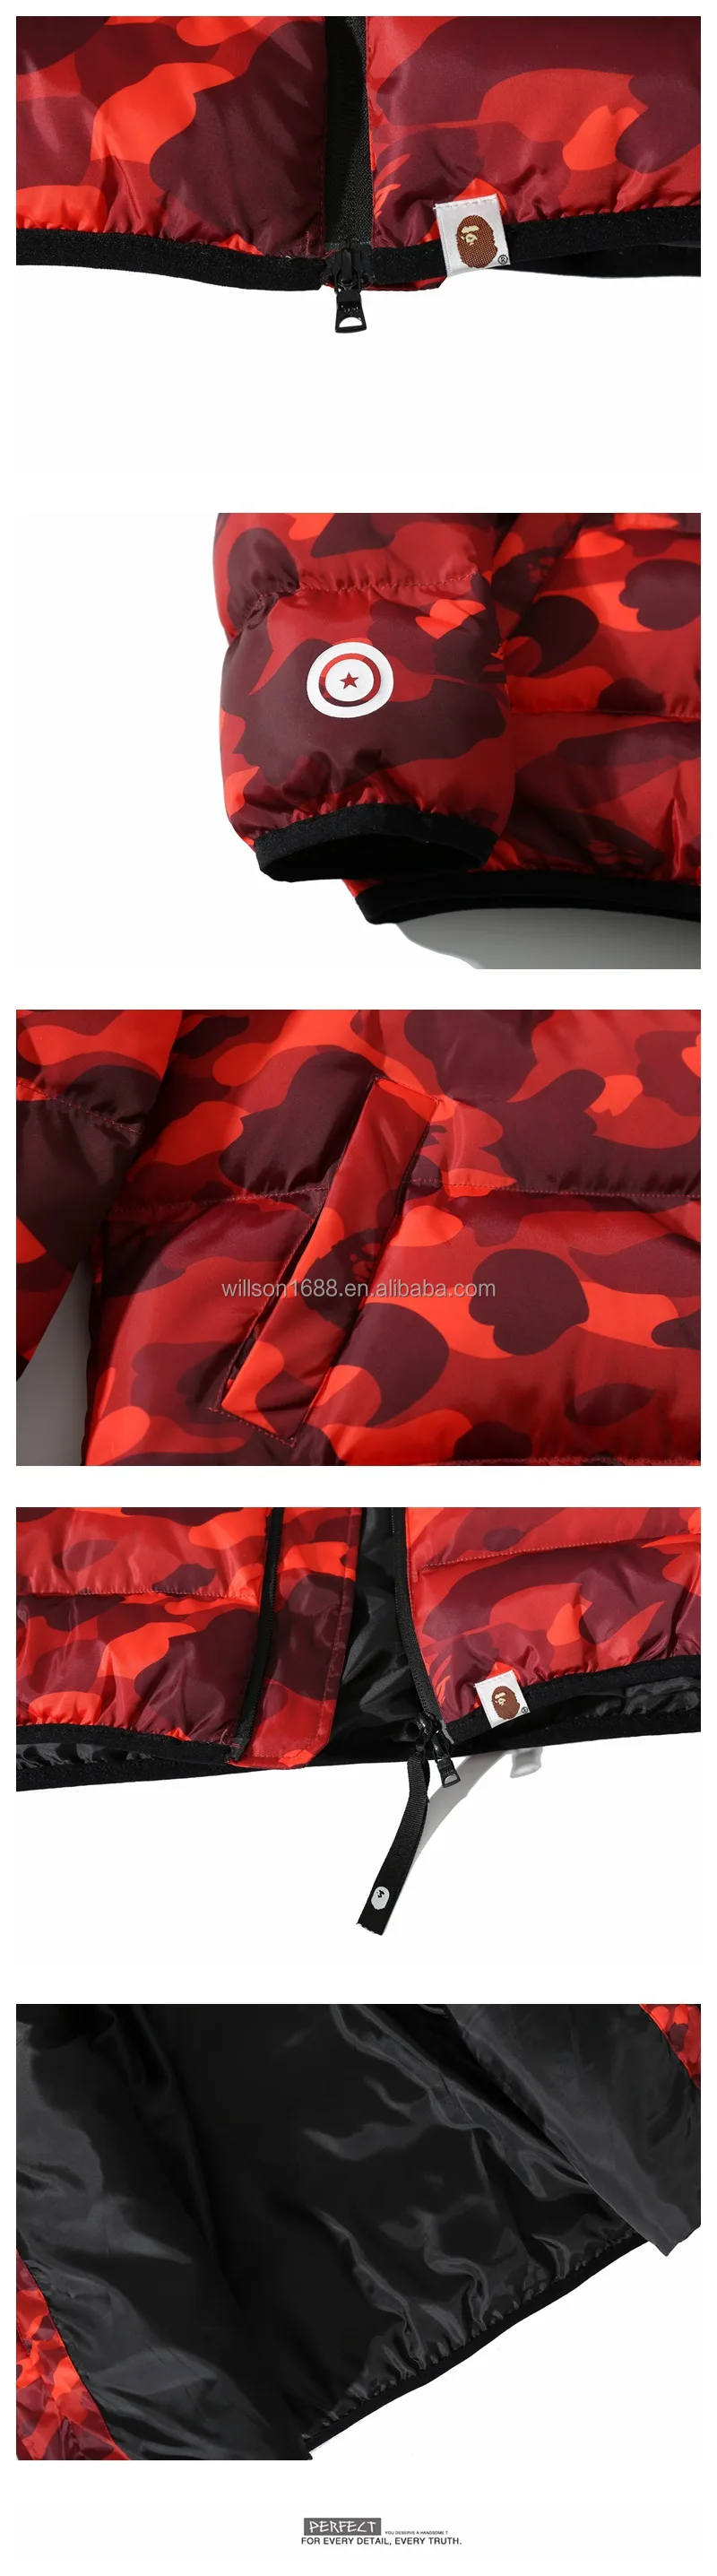 COLOR CAMO PADDED CHINESE JACKET –